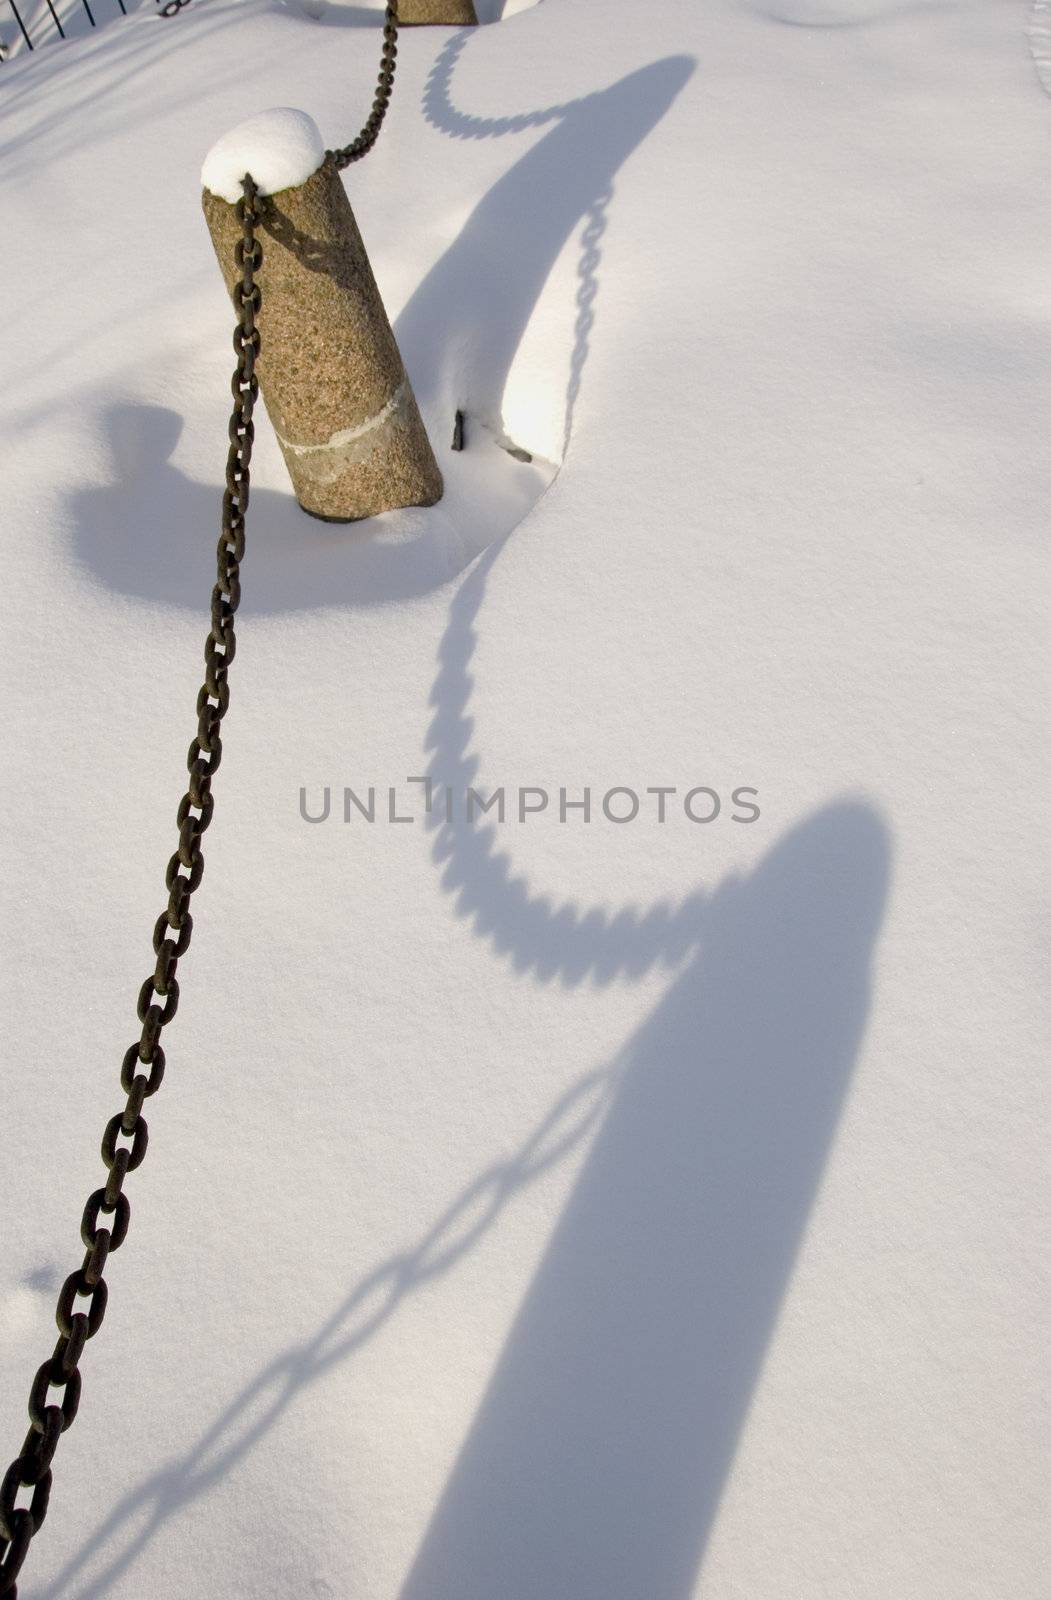 Shadows of decorative fence with chains covered with deep winter snow.